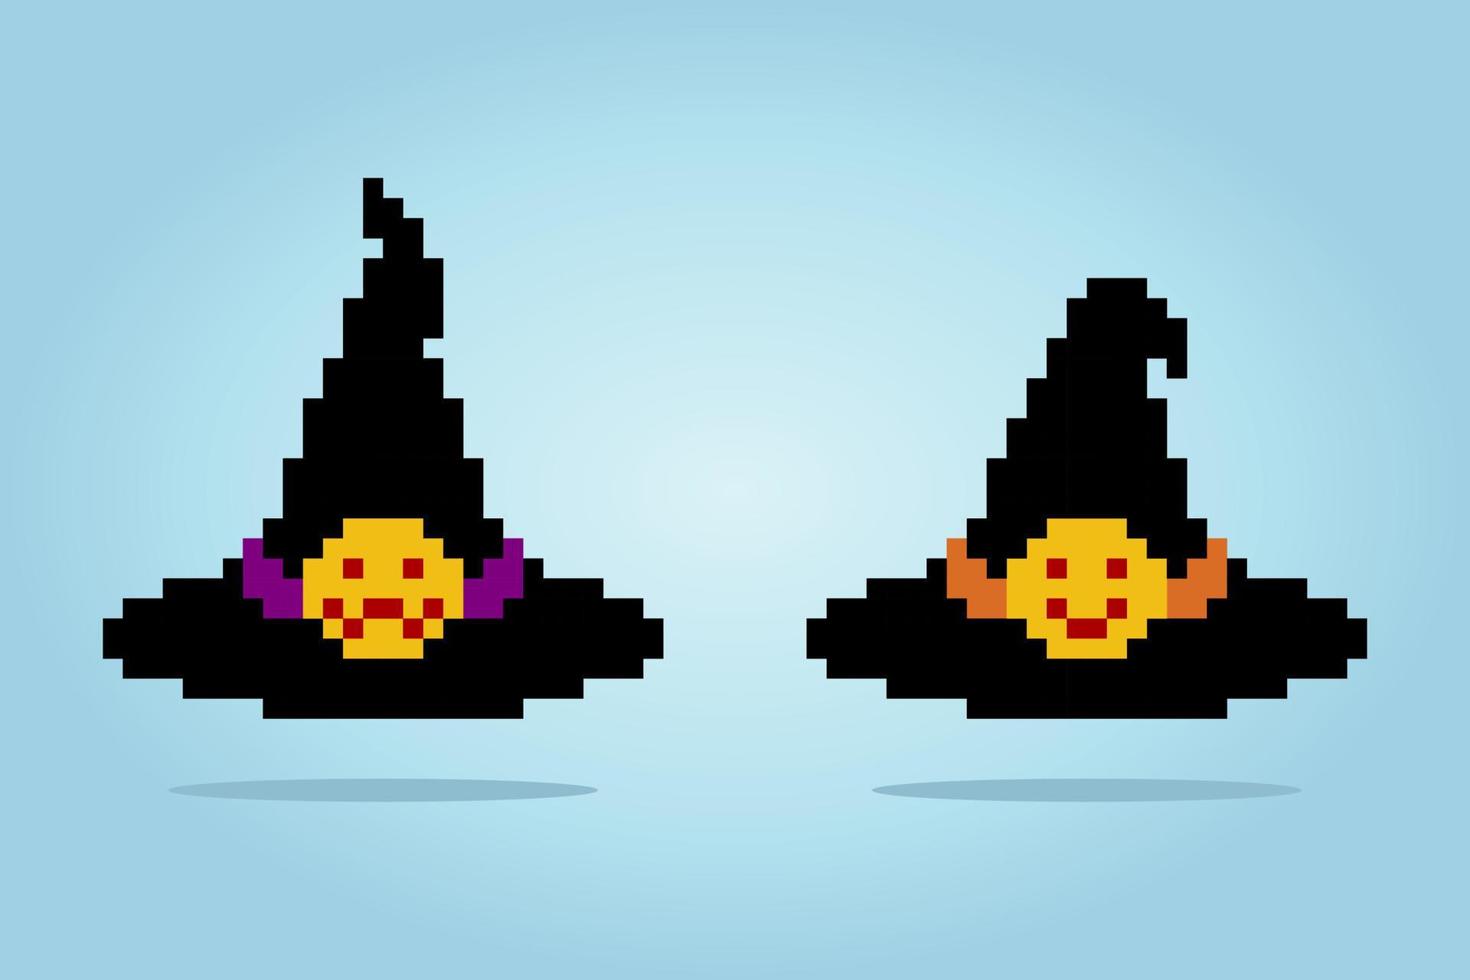 8 bit pixel the witch hat, in vector illustration for game asset or cross stitch pattern